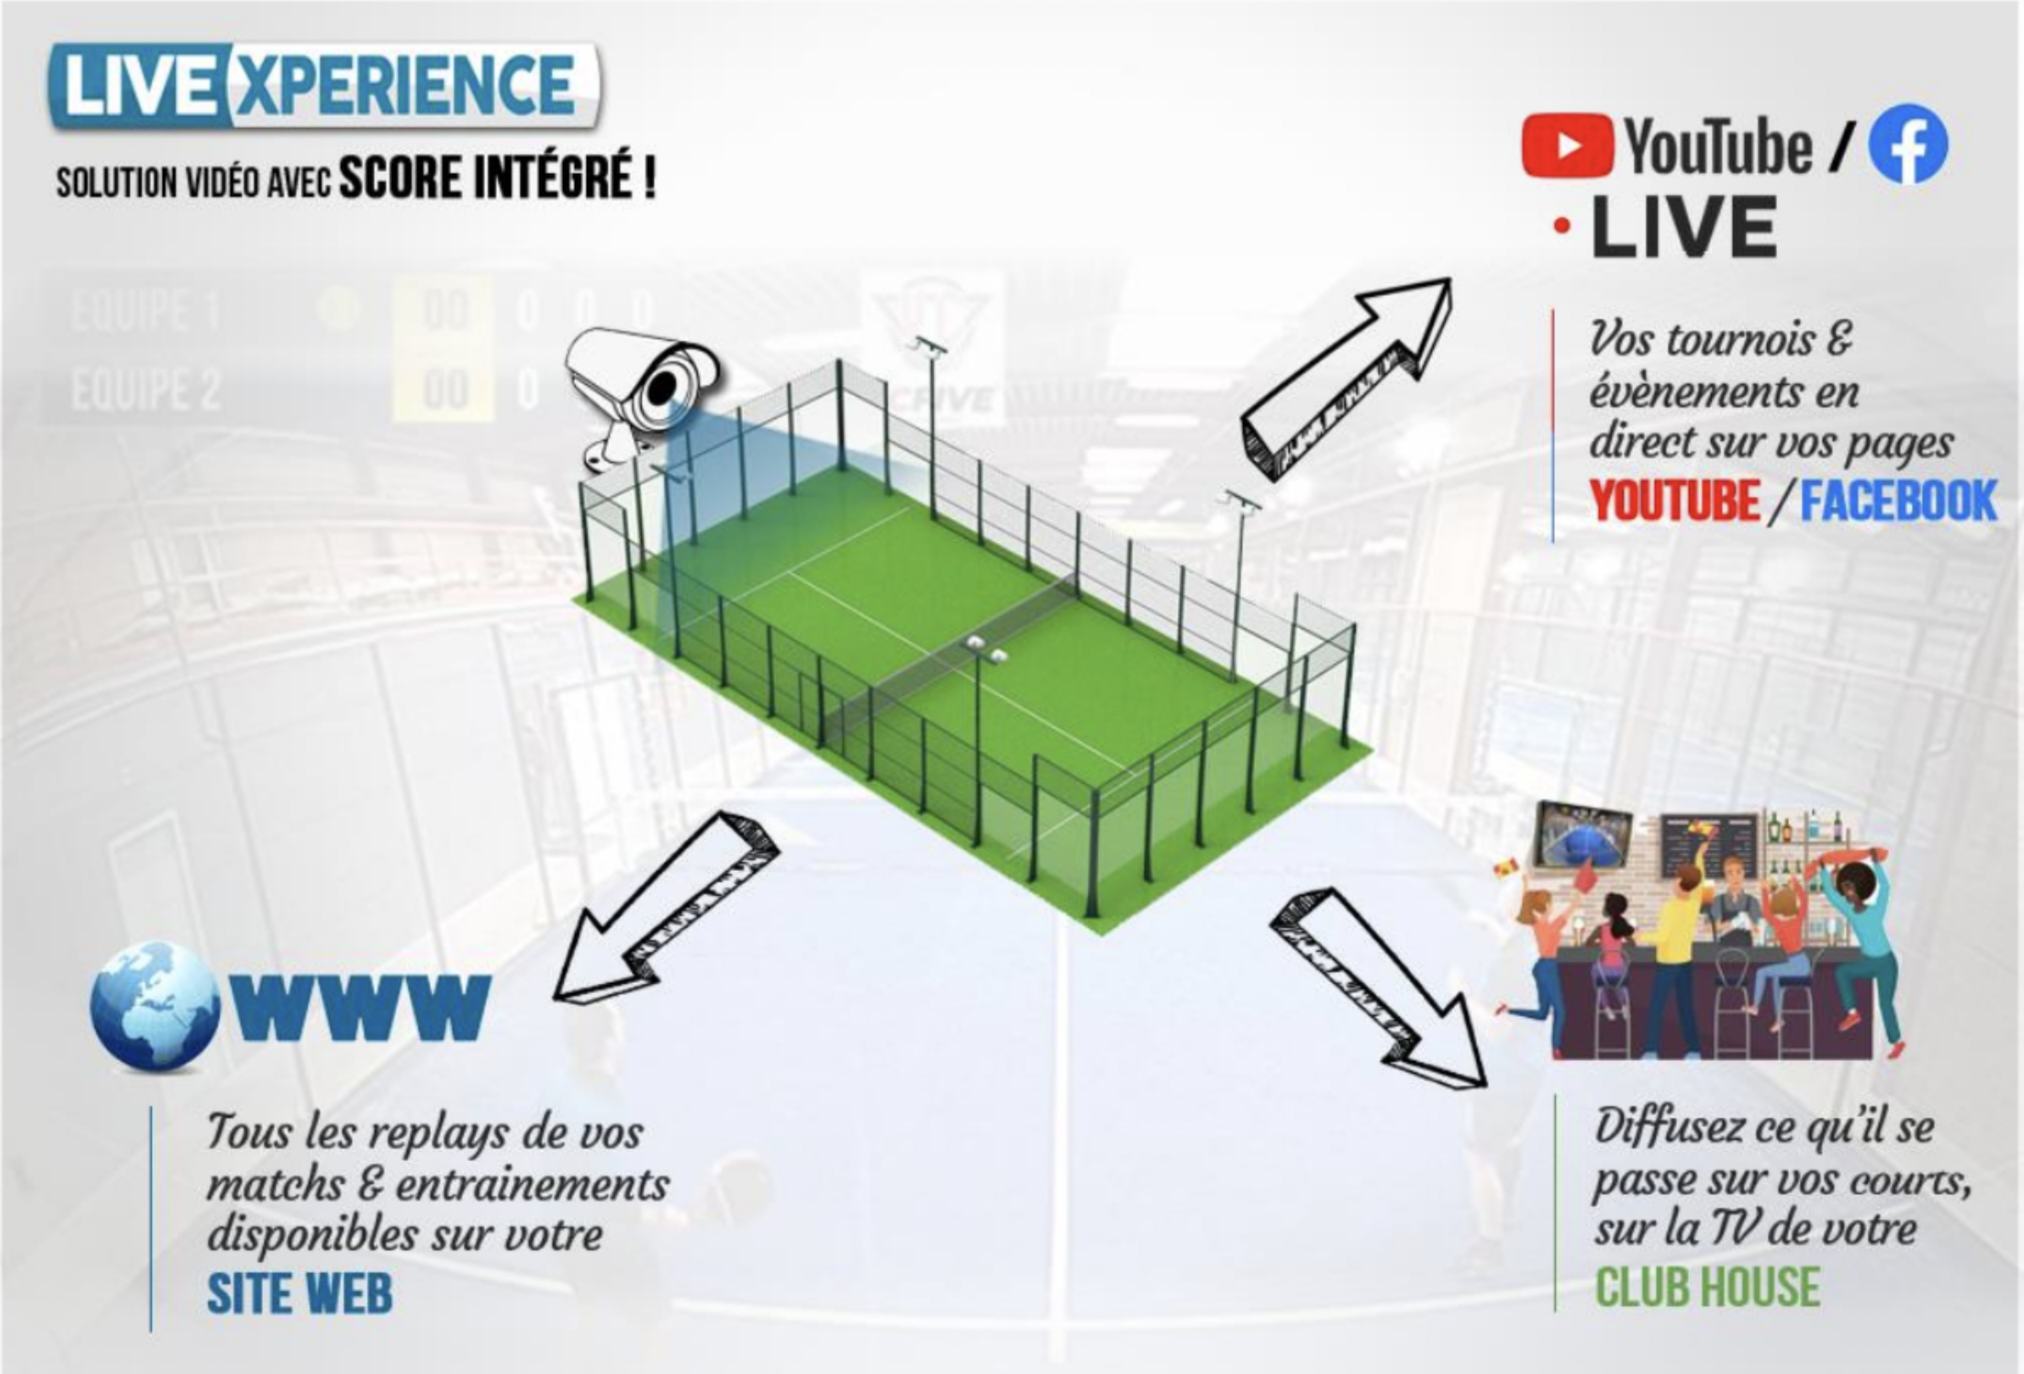 LiveXperience: offering maximum visibility to clubs